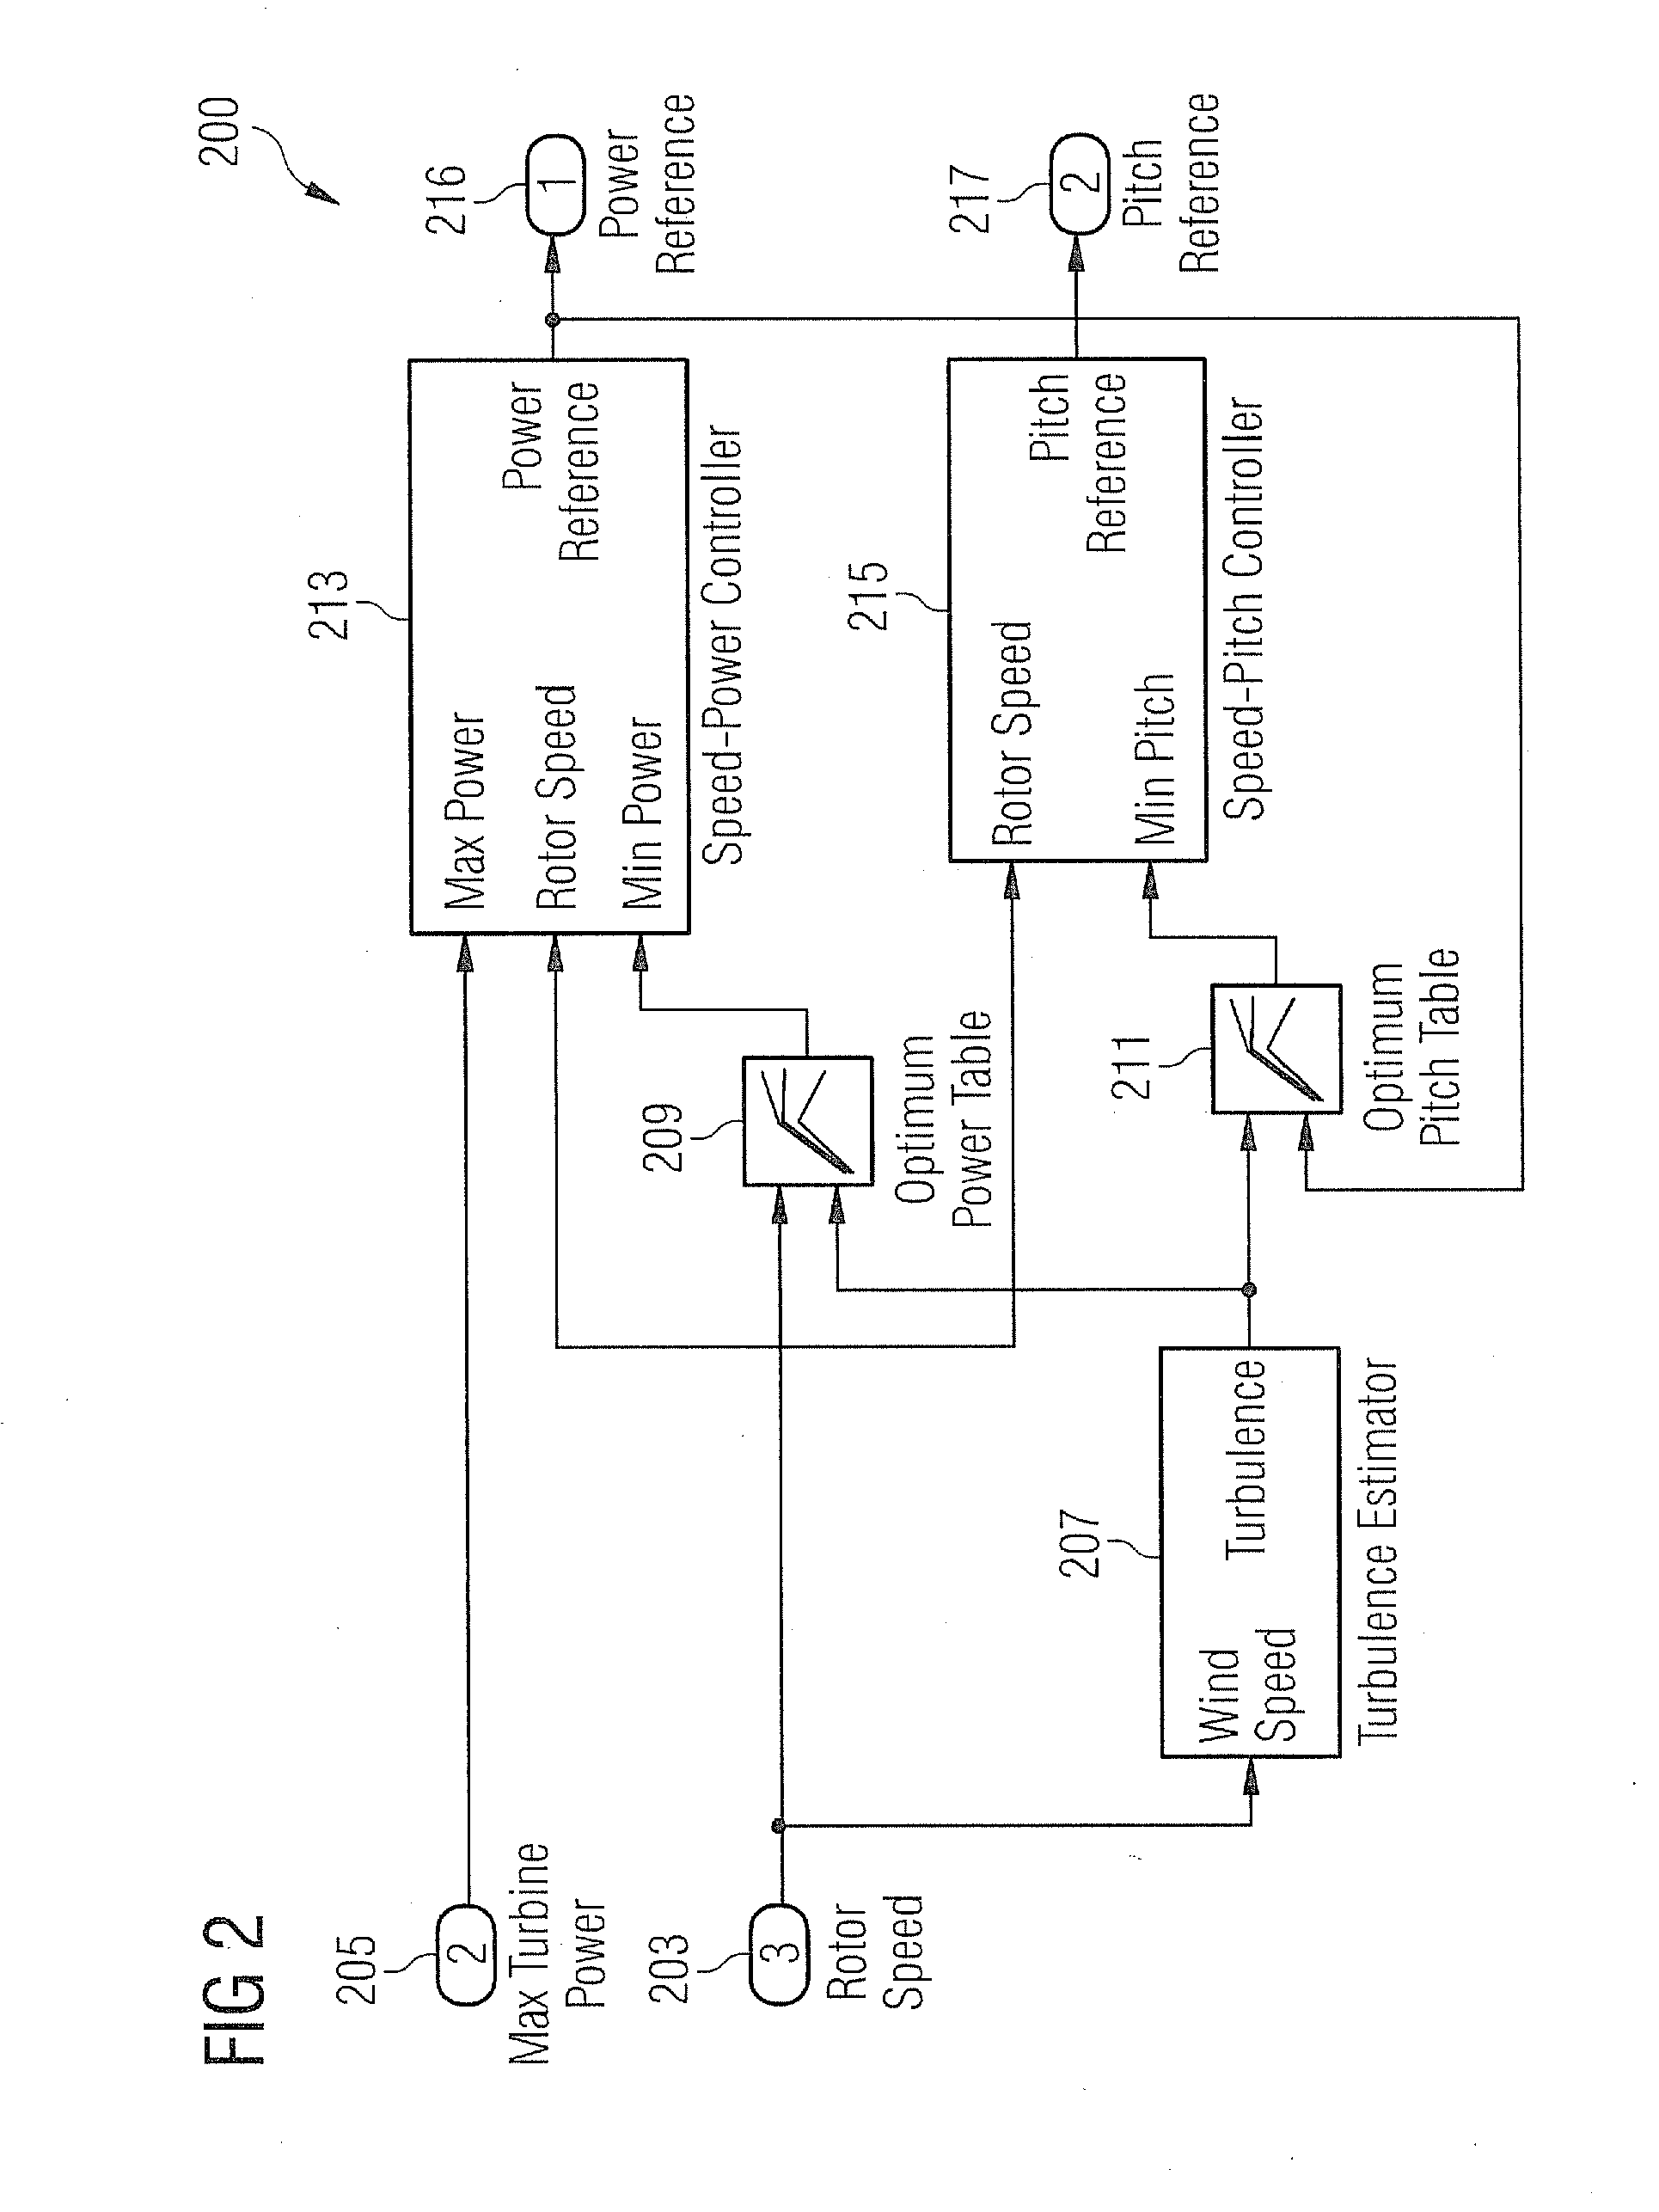 Method and system for adjusting a power parameter of a wind turbine